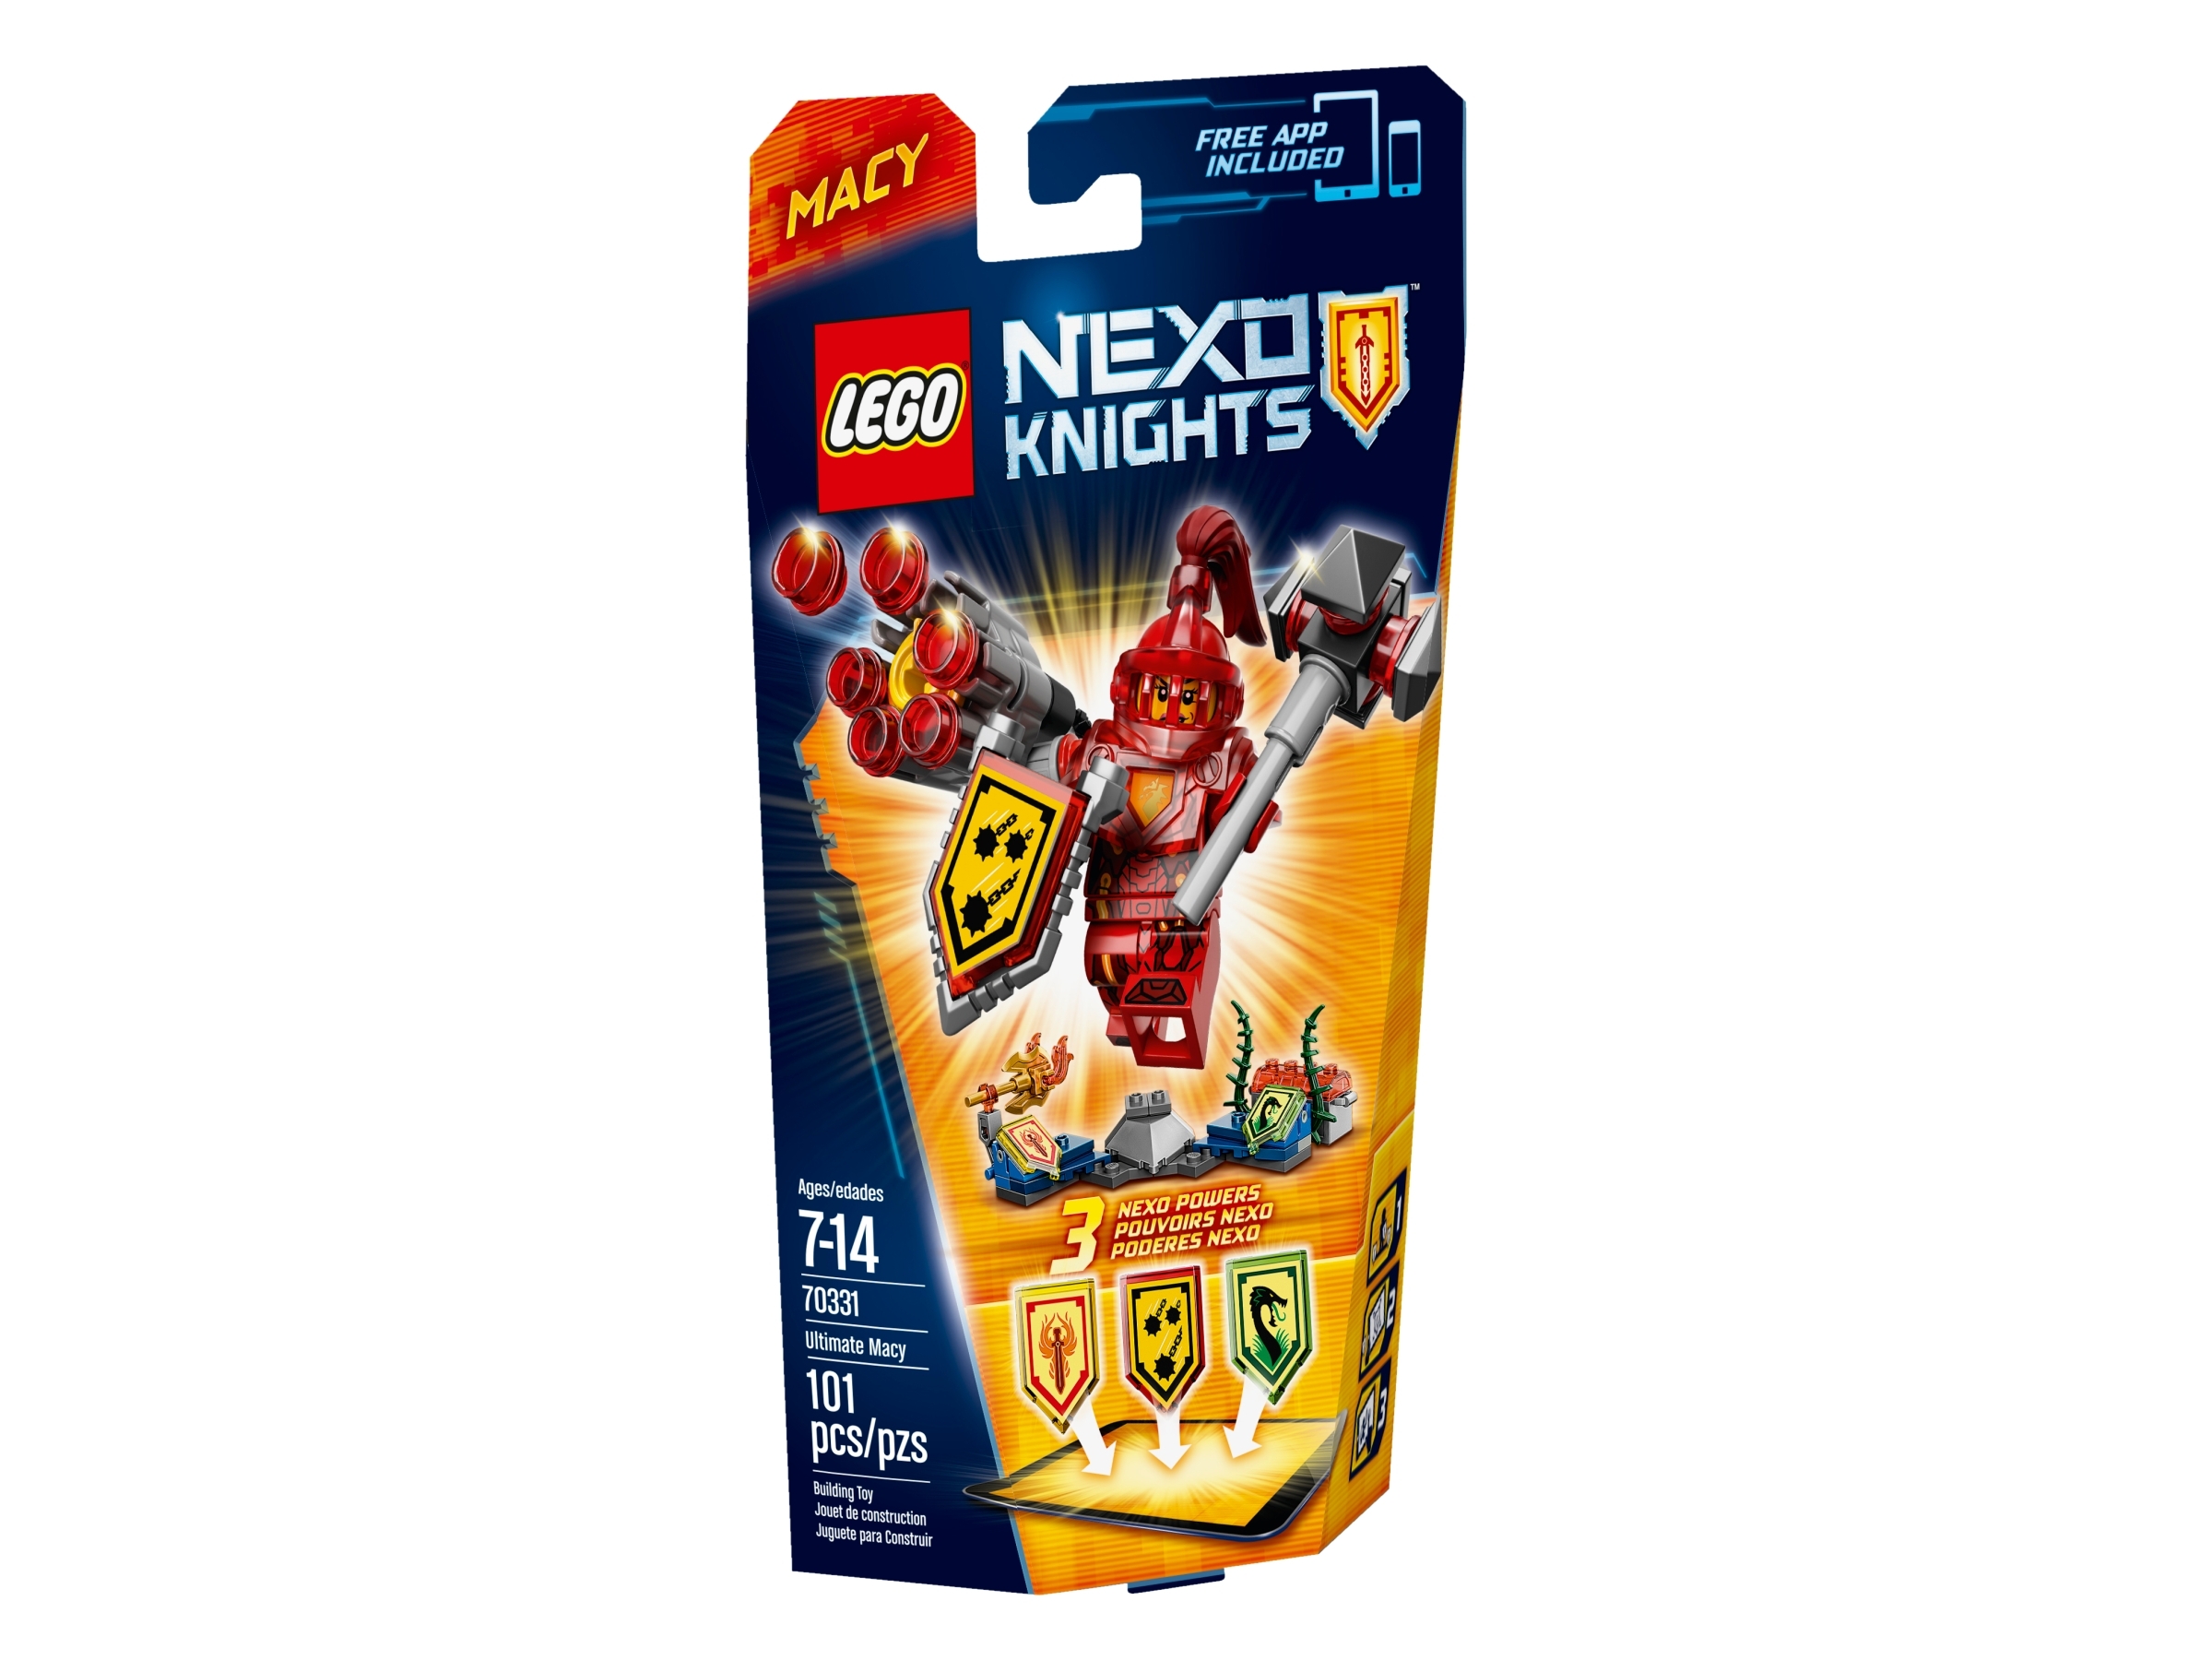 Lego Nexo Knights LE 5 Ultimative Macy Limitierte Auflage Trading Card Game 